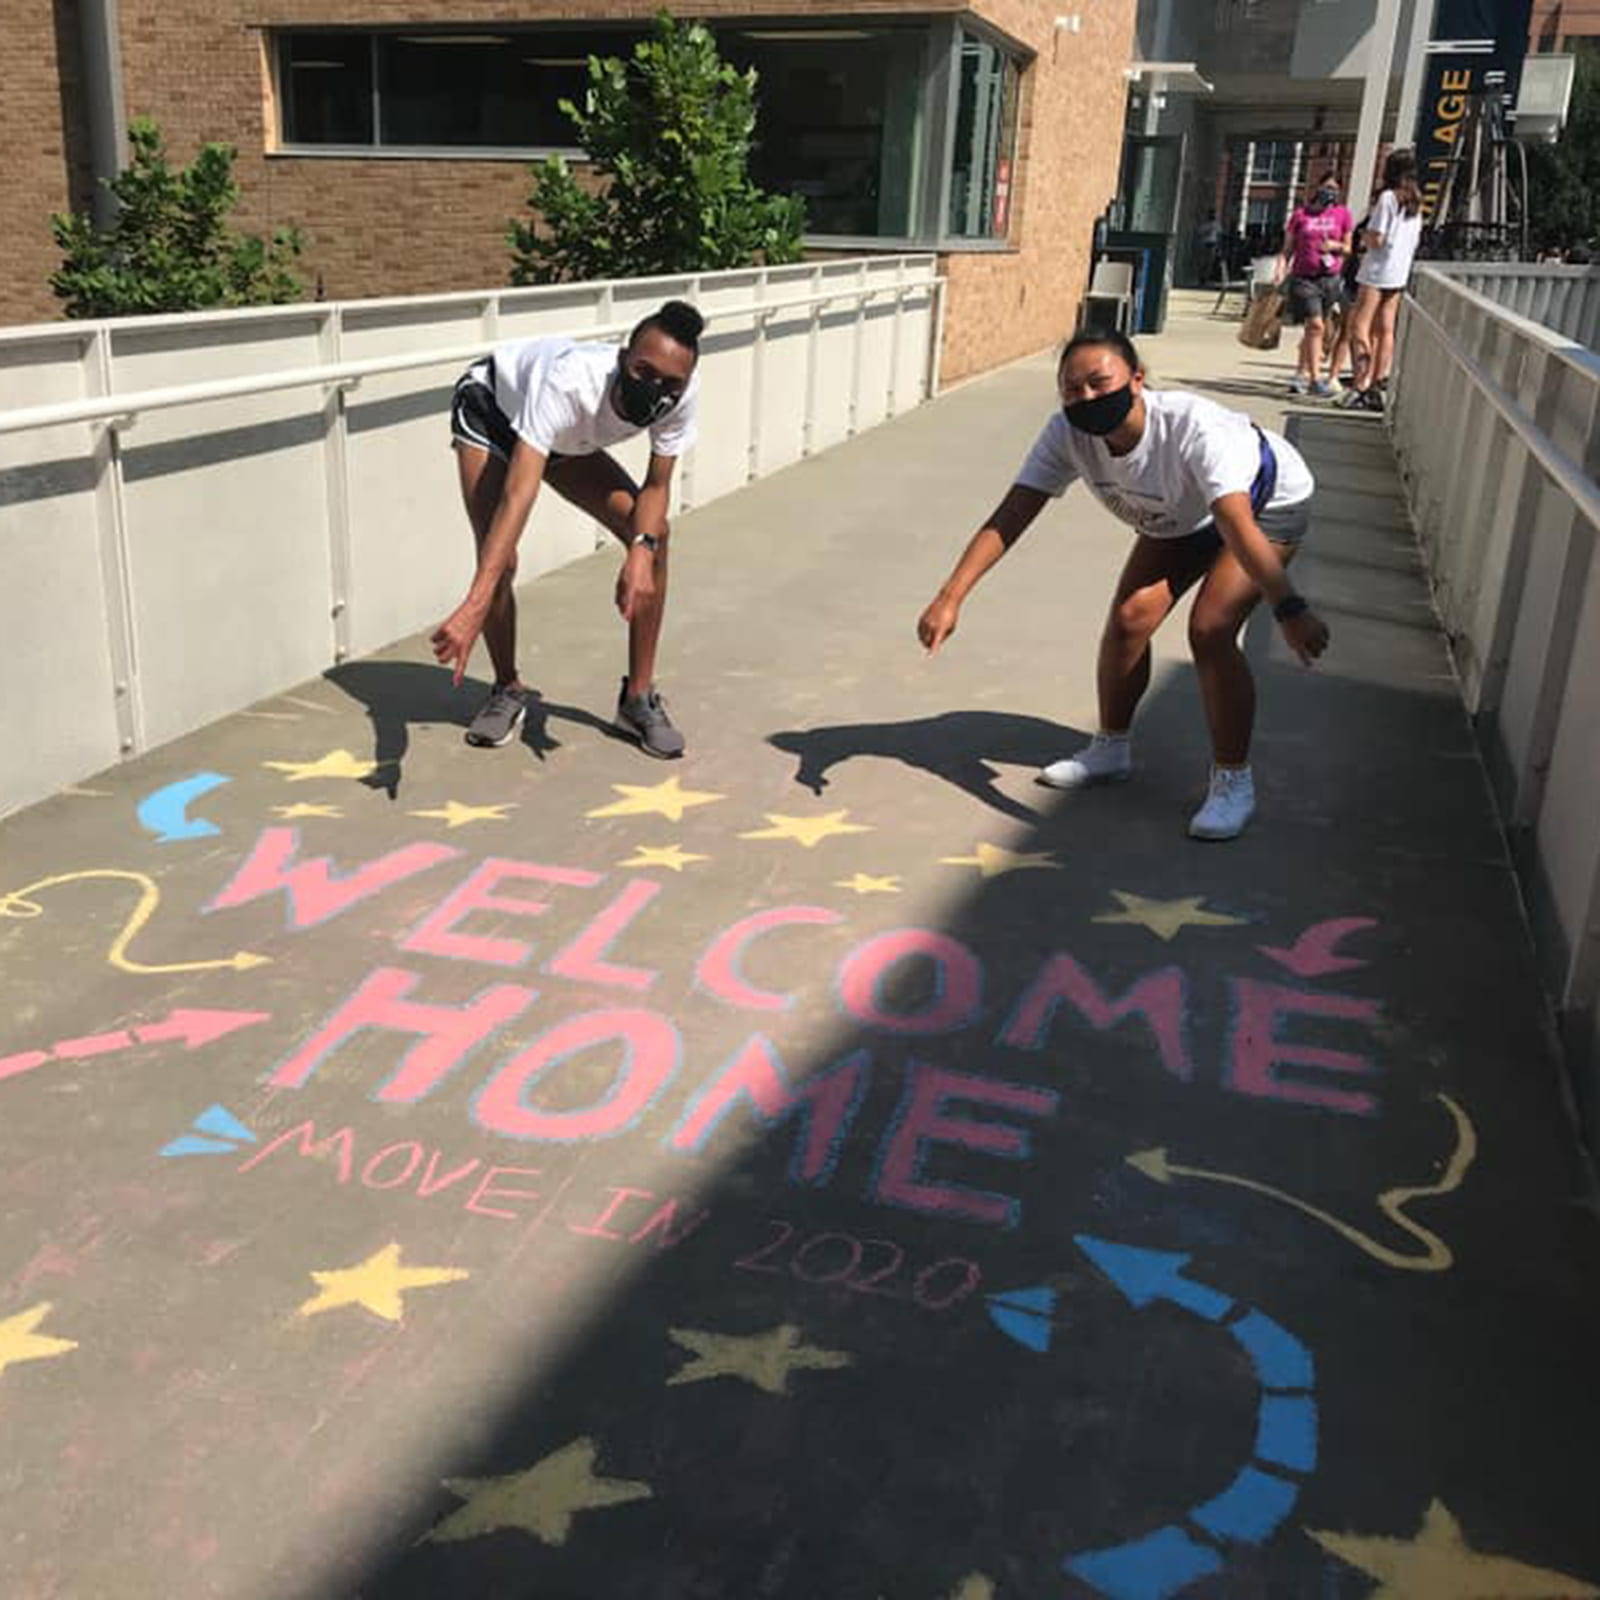 Two students pointing to 'Welcome Home' chalked on the ground.